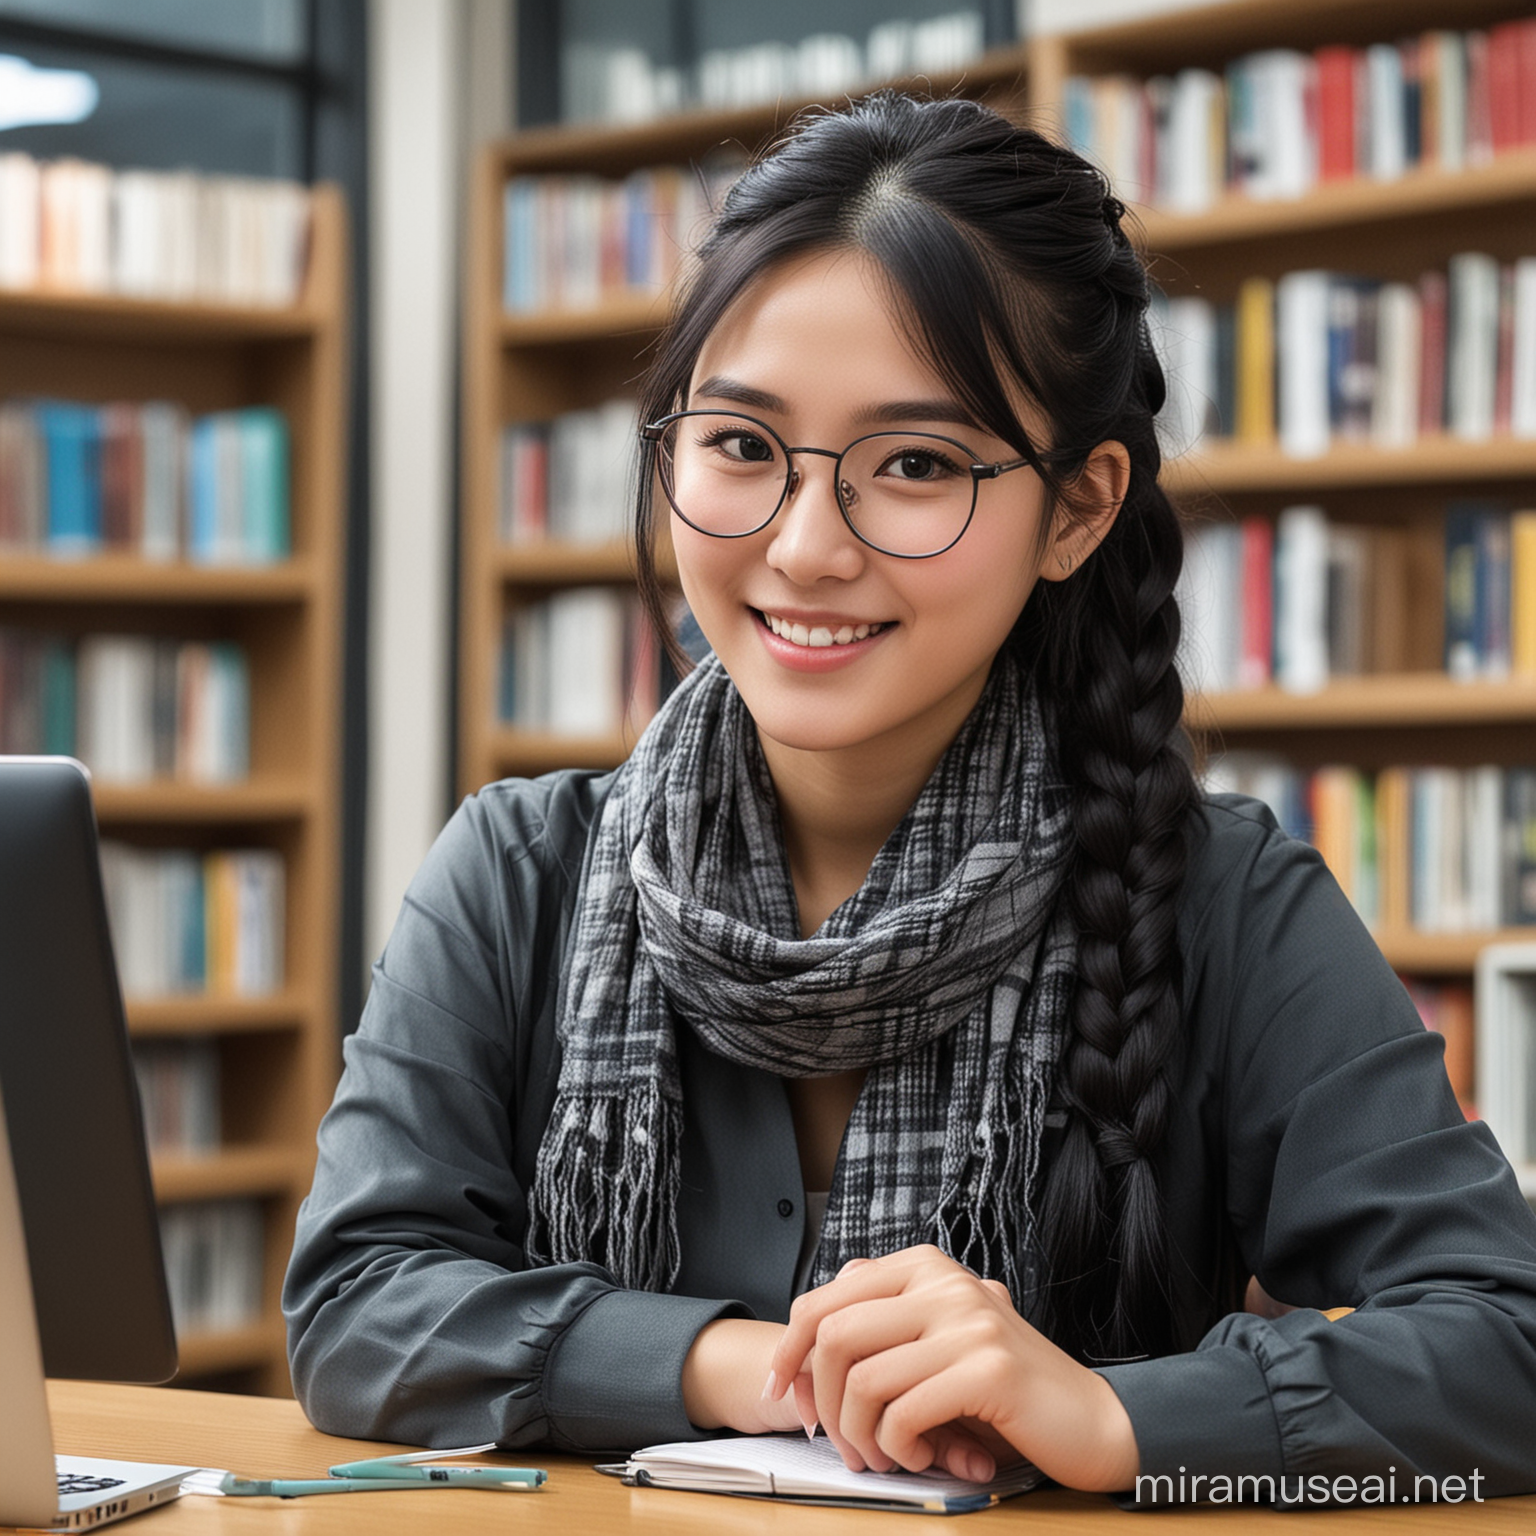 Smiling Korean Girl with Braided Hair Studying in Library with Laptop